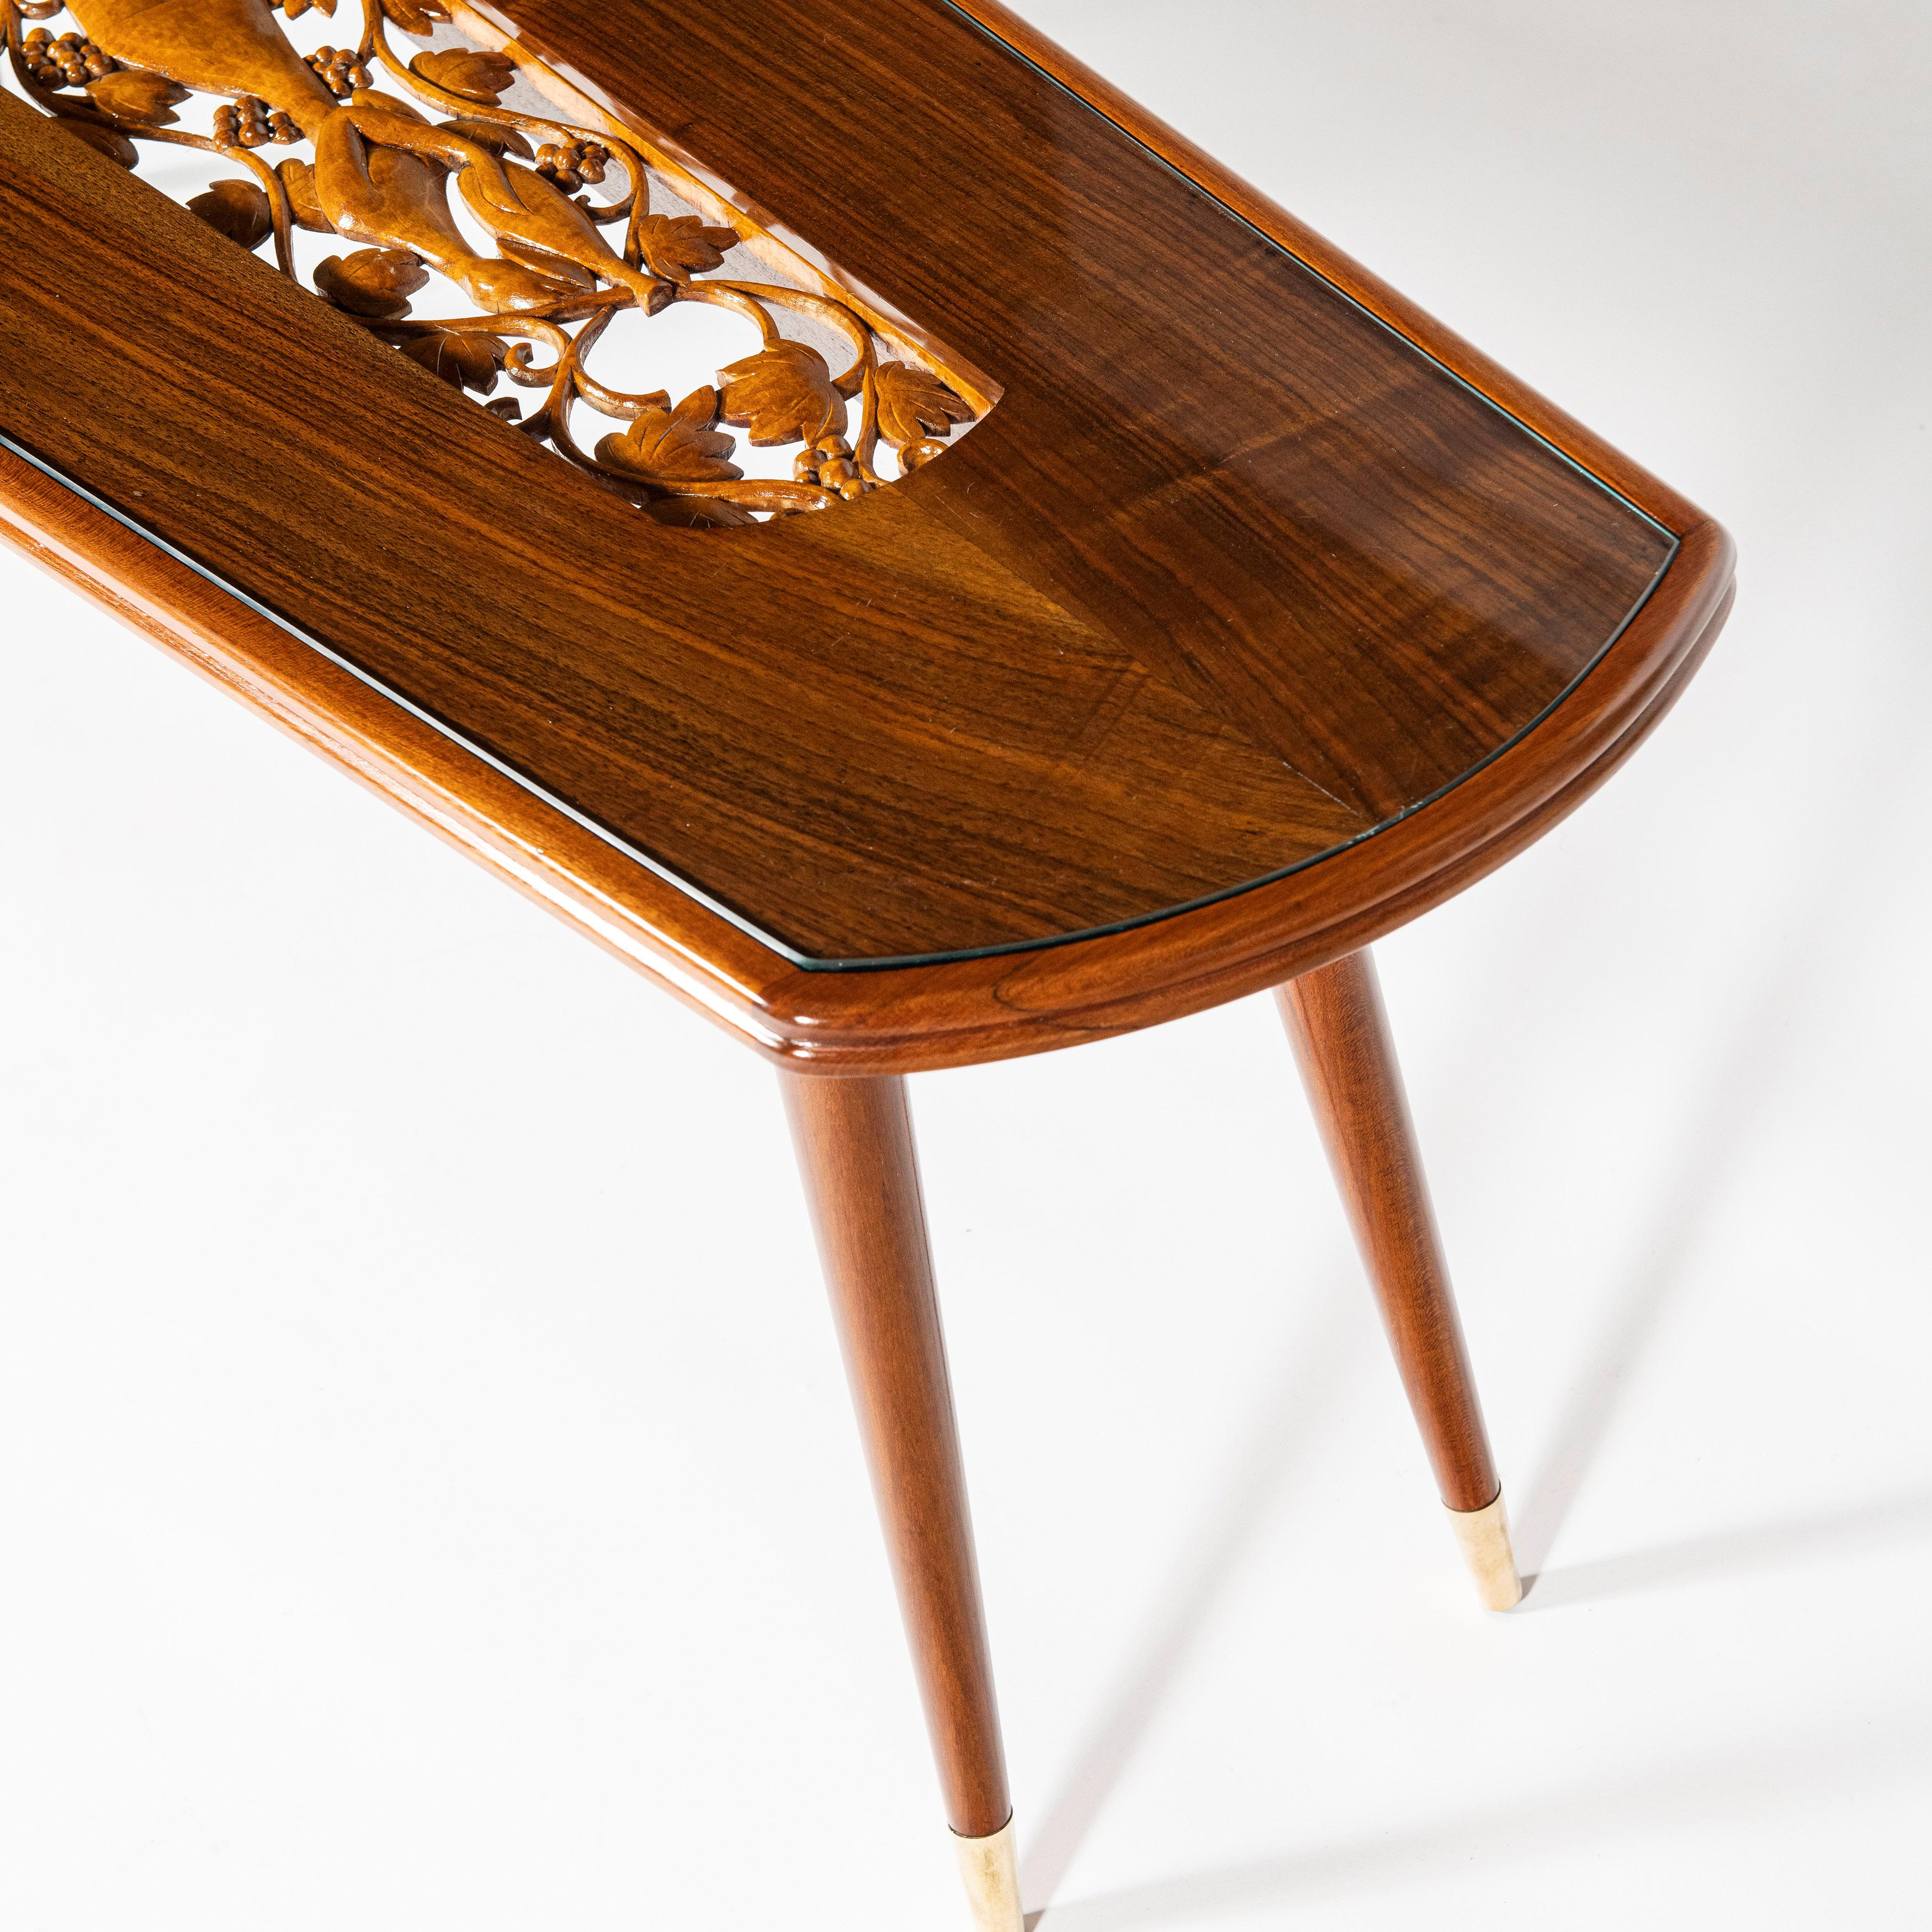 Wood and glass low table by Englander & Bonta, Argentina, Buenos Aires, circa 1950.